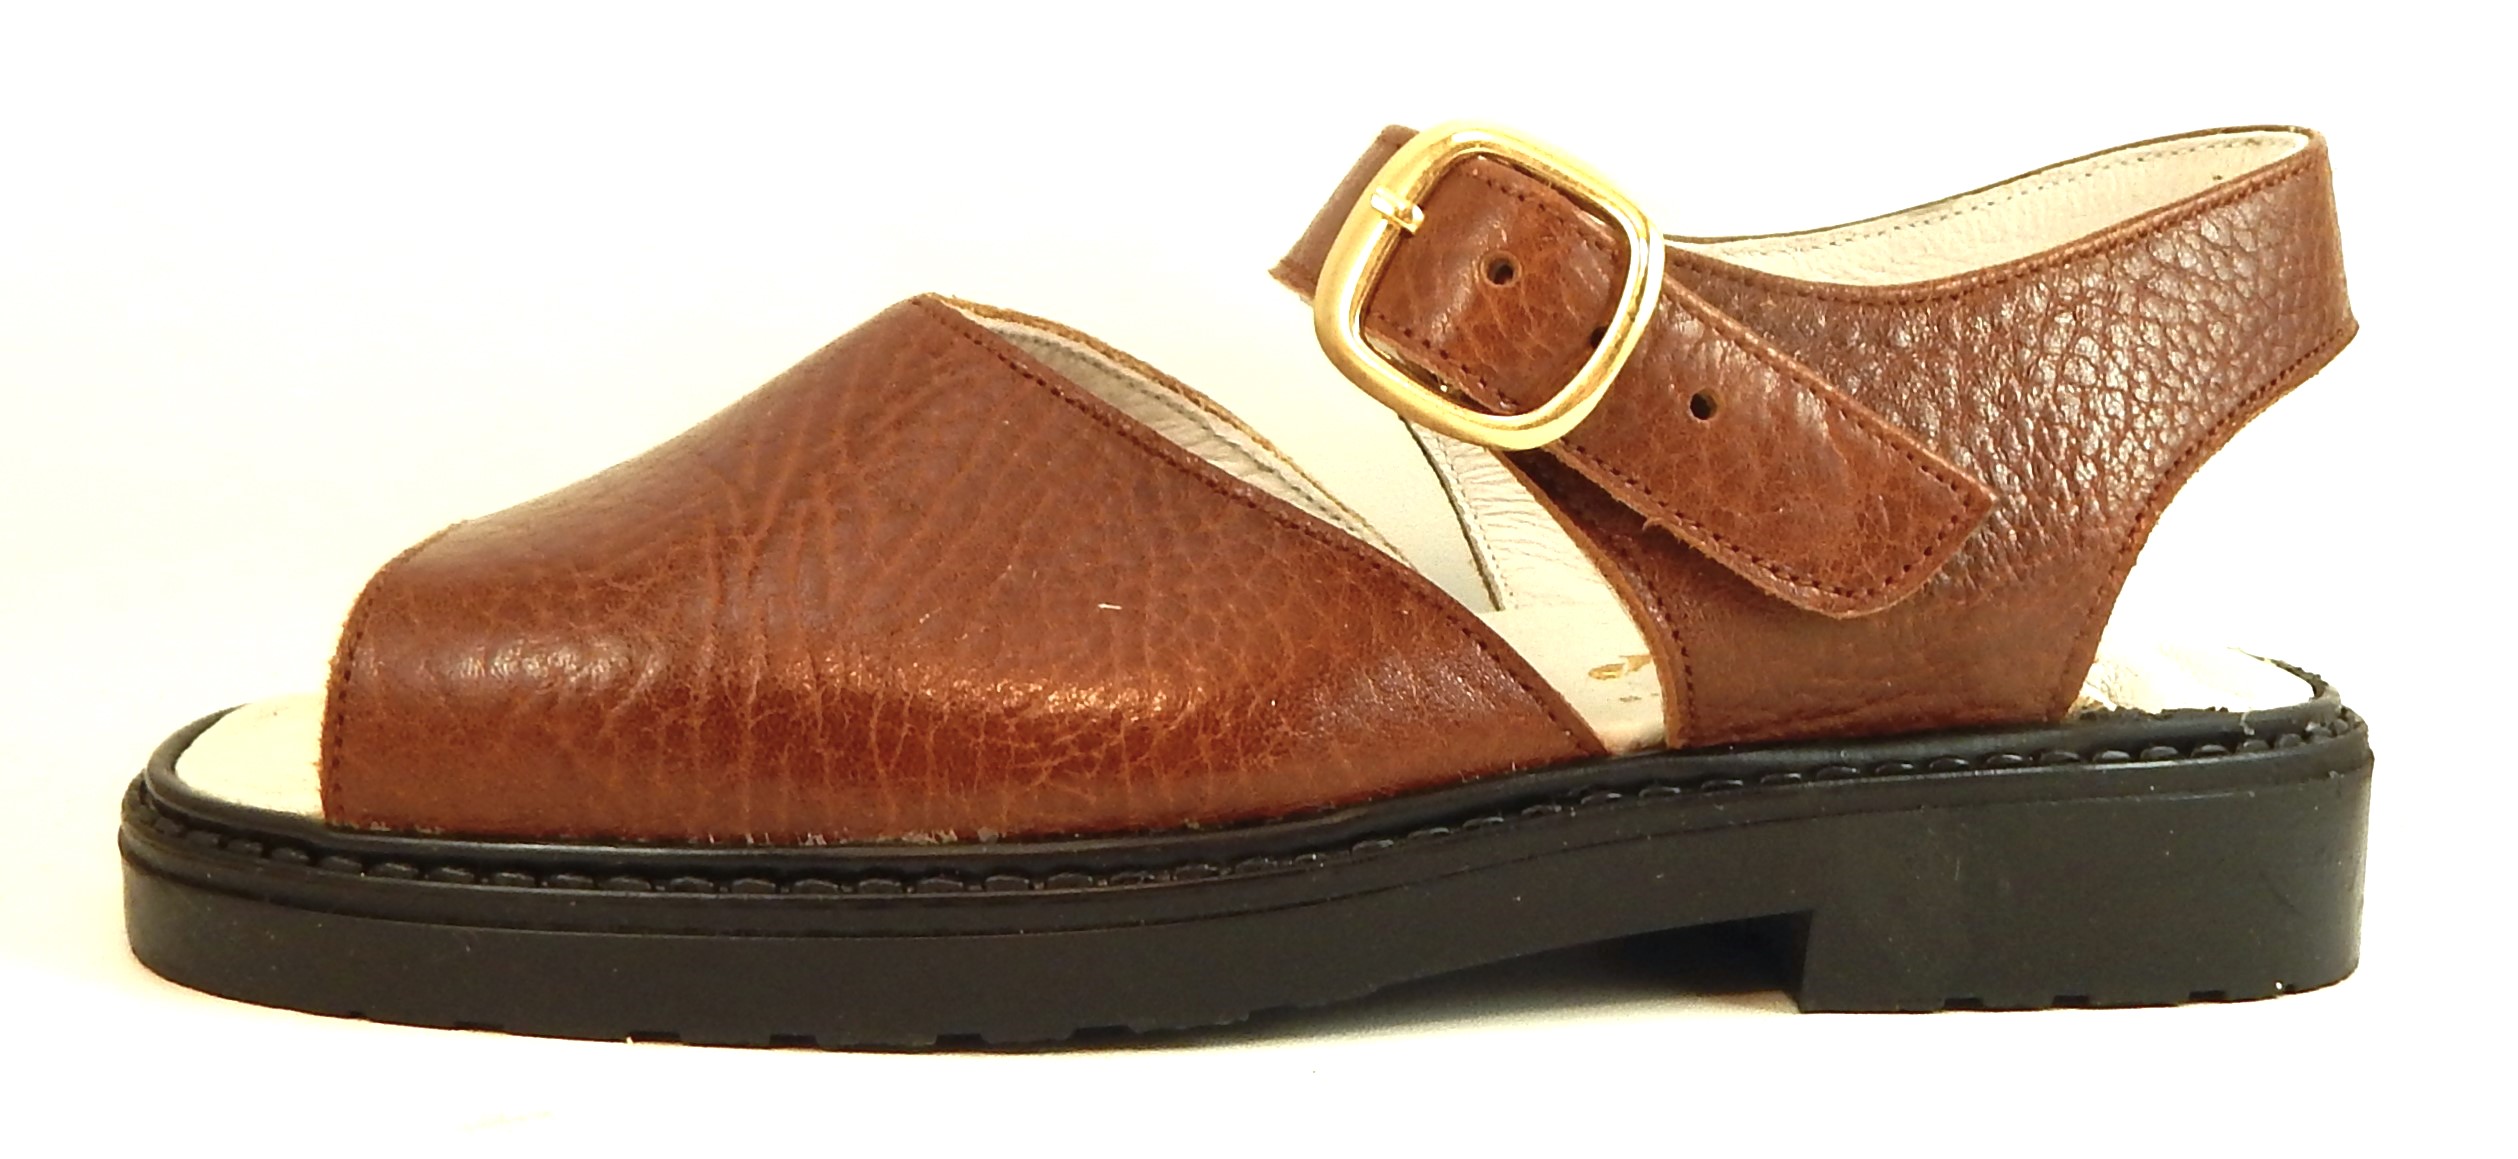 S-5003 - Classic Brown Sandals